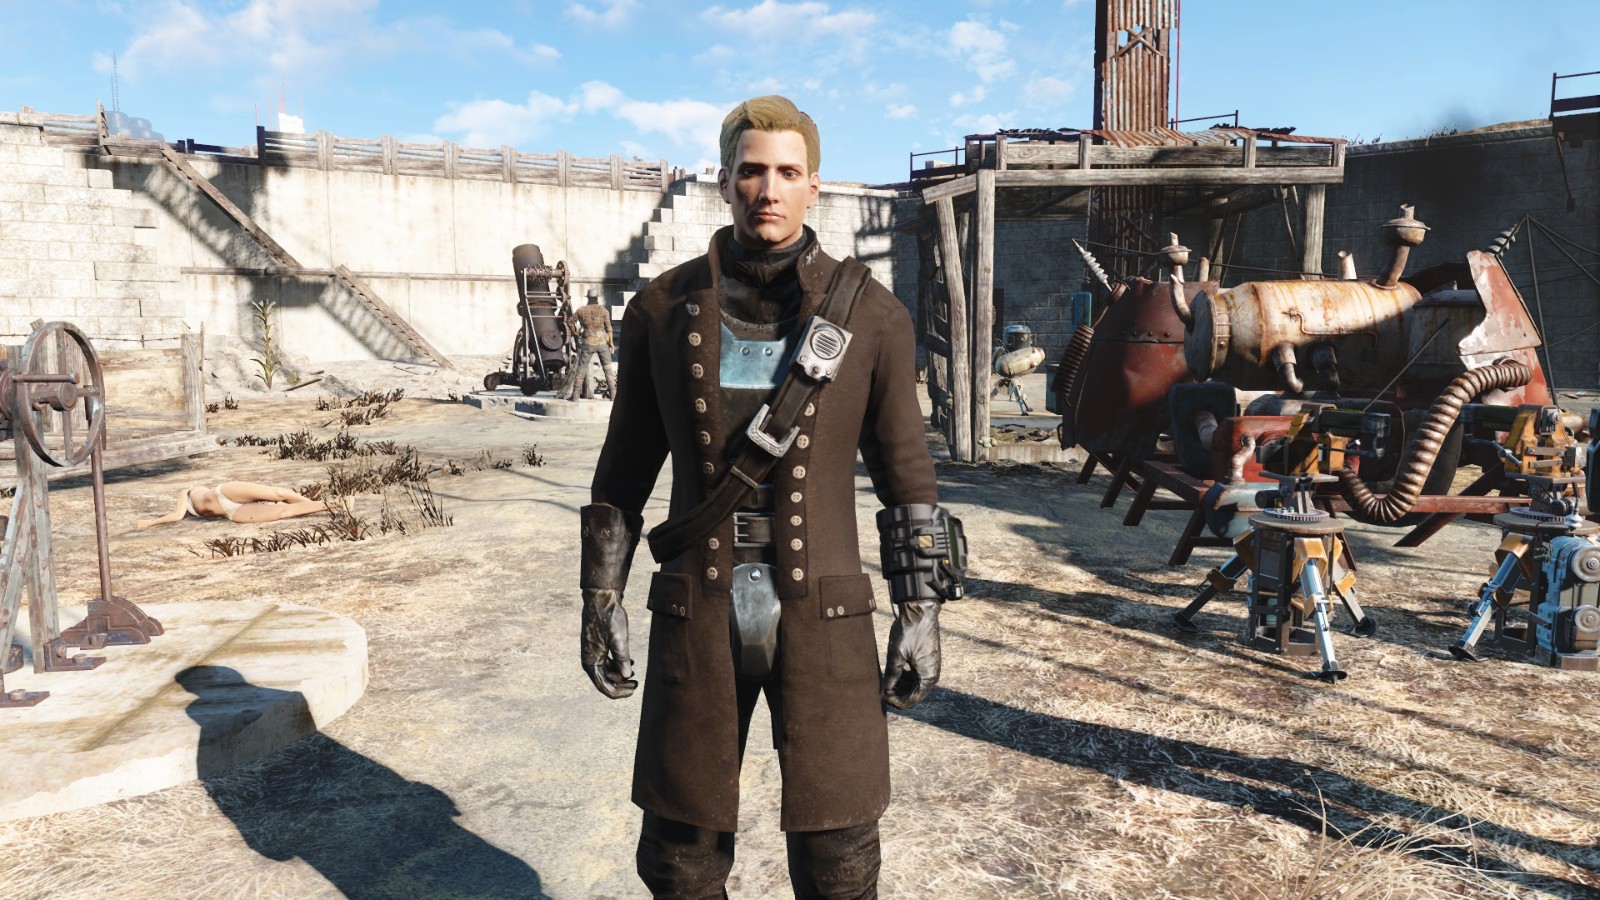 Militarized minutemen at fallout 4 фото 113